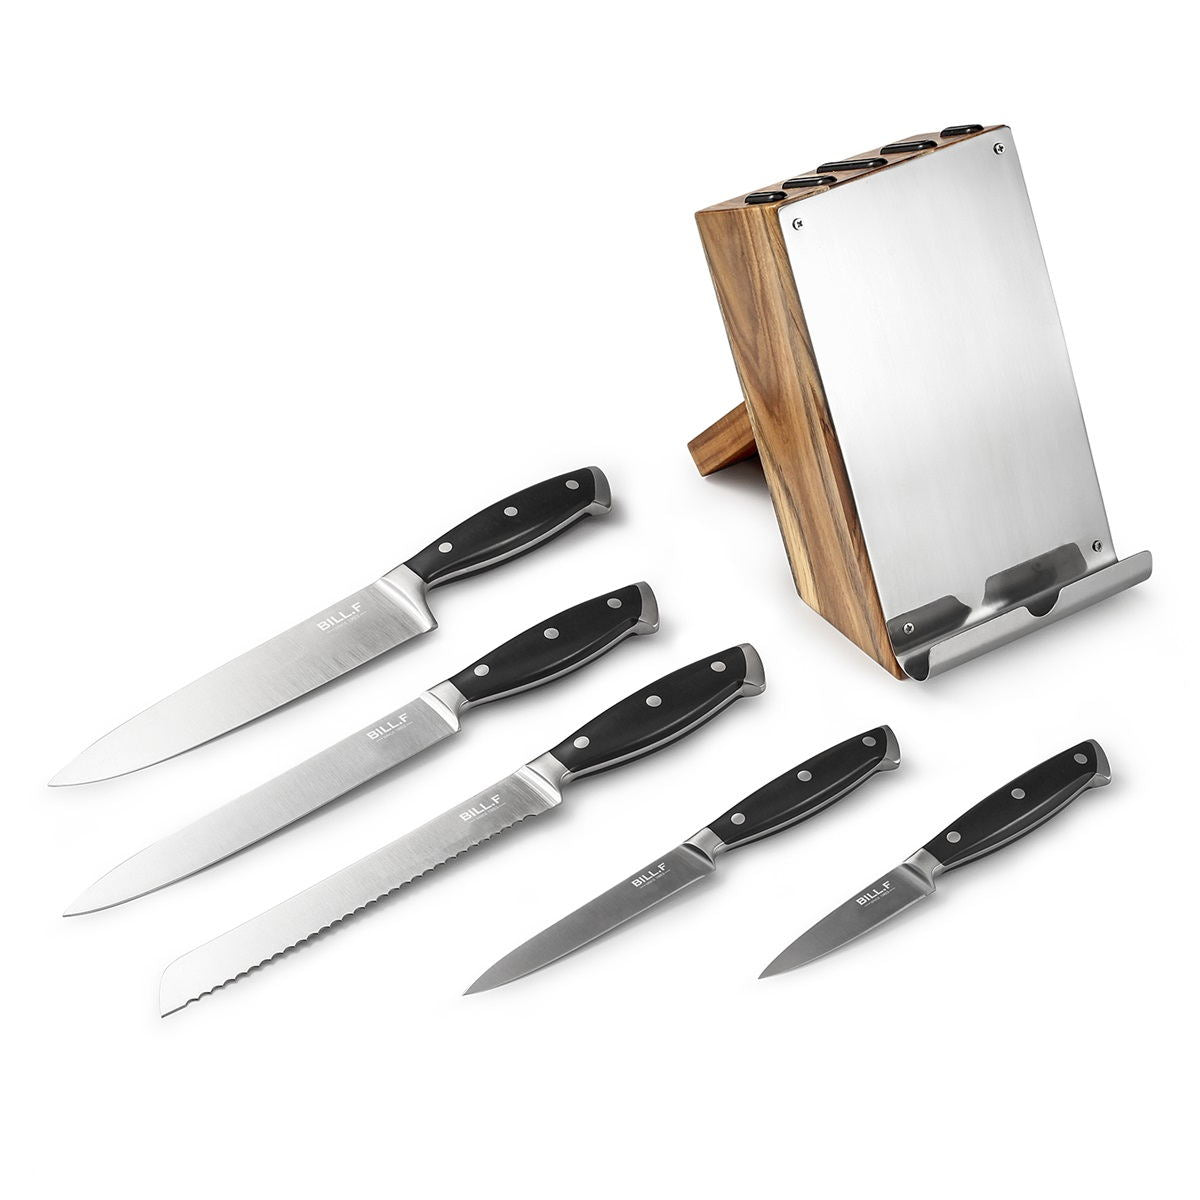 Bill.F® 6 Pieces Wooden Knife Block Set With Tablet/Cookbook Stand – BillF